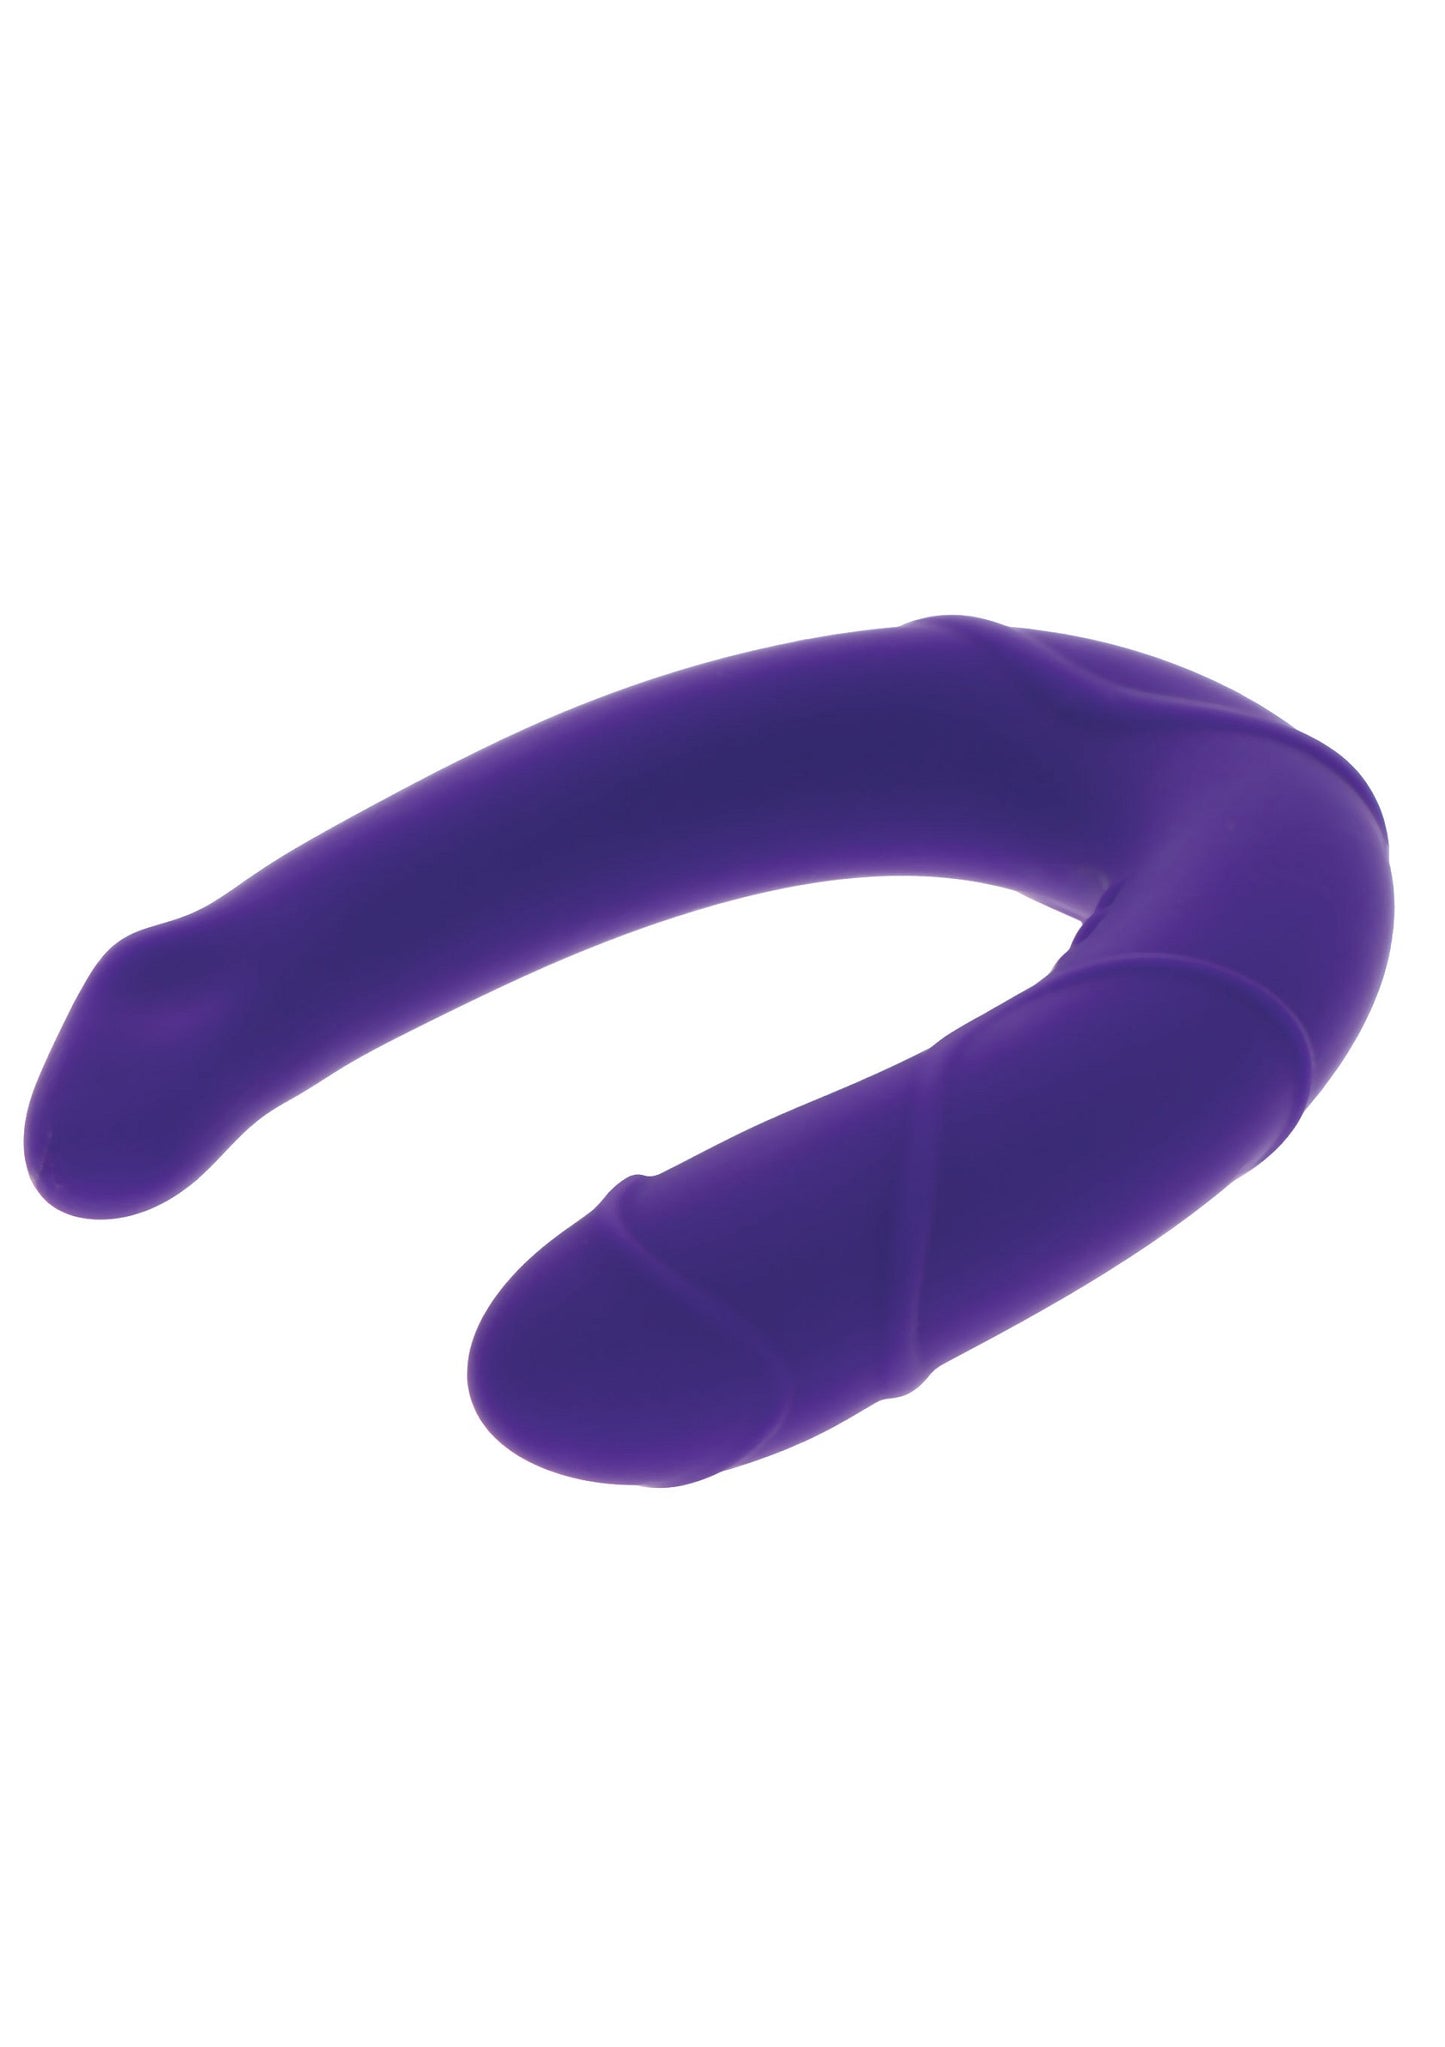 ToyJoy Get Real Vogue Mini Double Dong PURPLE - 3